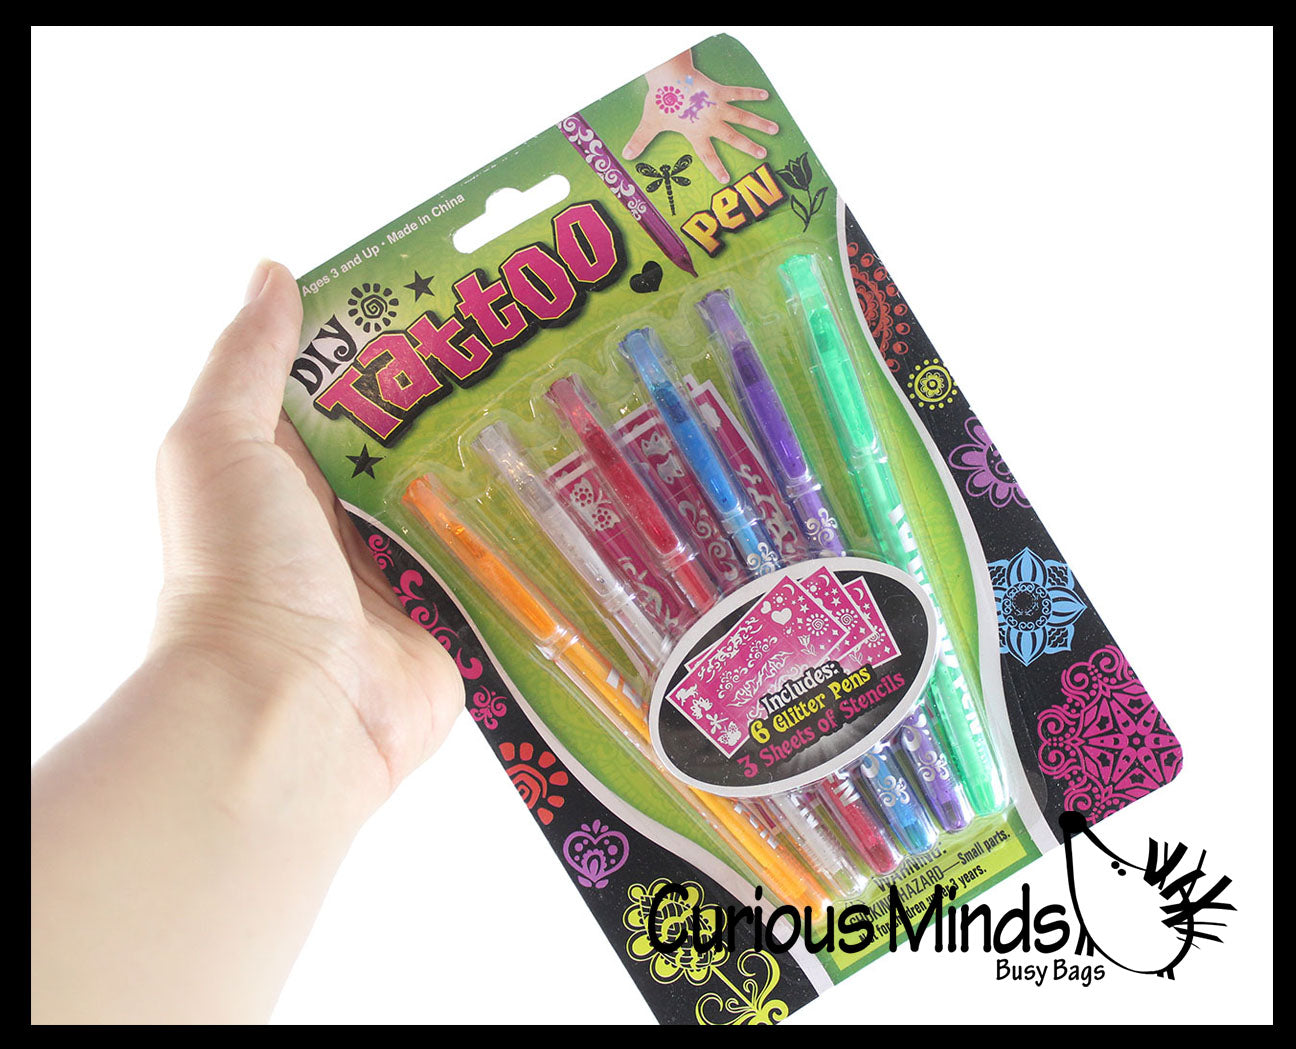 Curious Minds Busy Bags 6 Pack of Tattoo Gel Pens - Fake Tattoo Fun with Stencils - Draw on Skin - Temporary Tattoos 1 Set